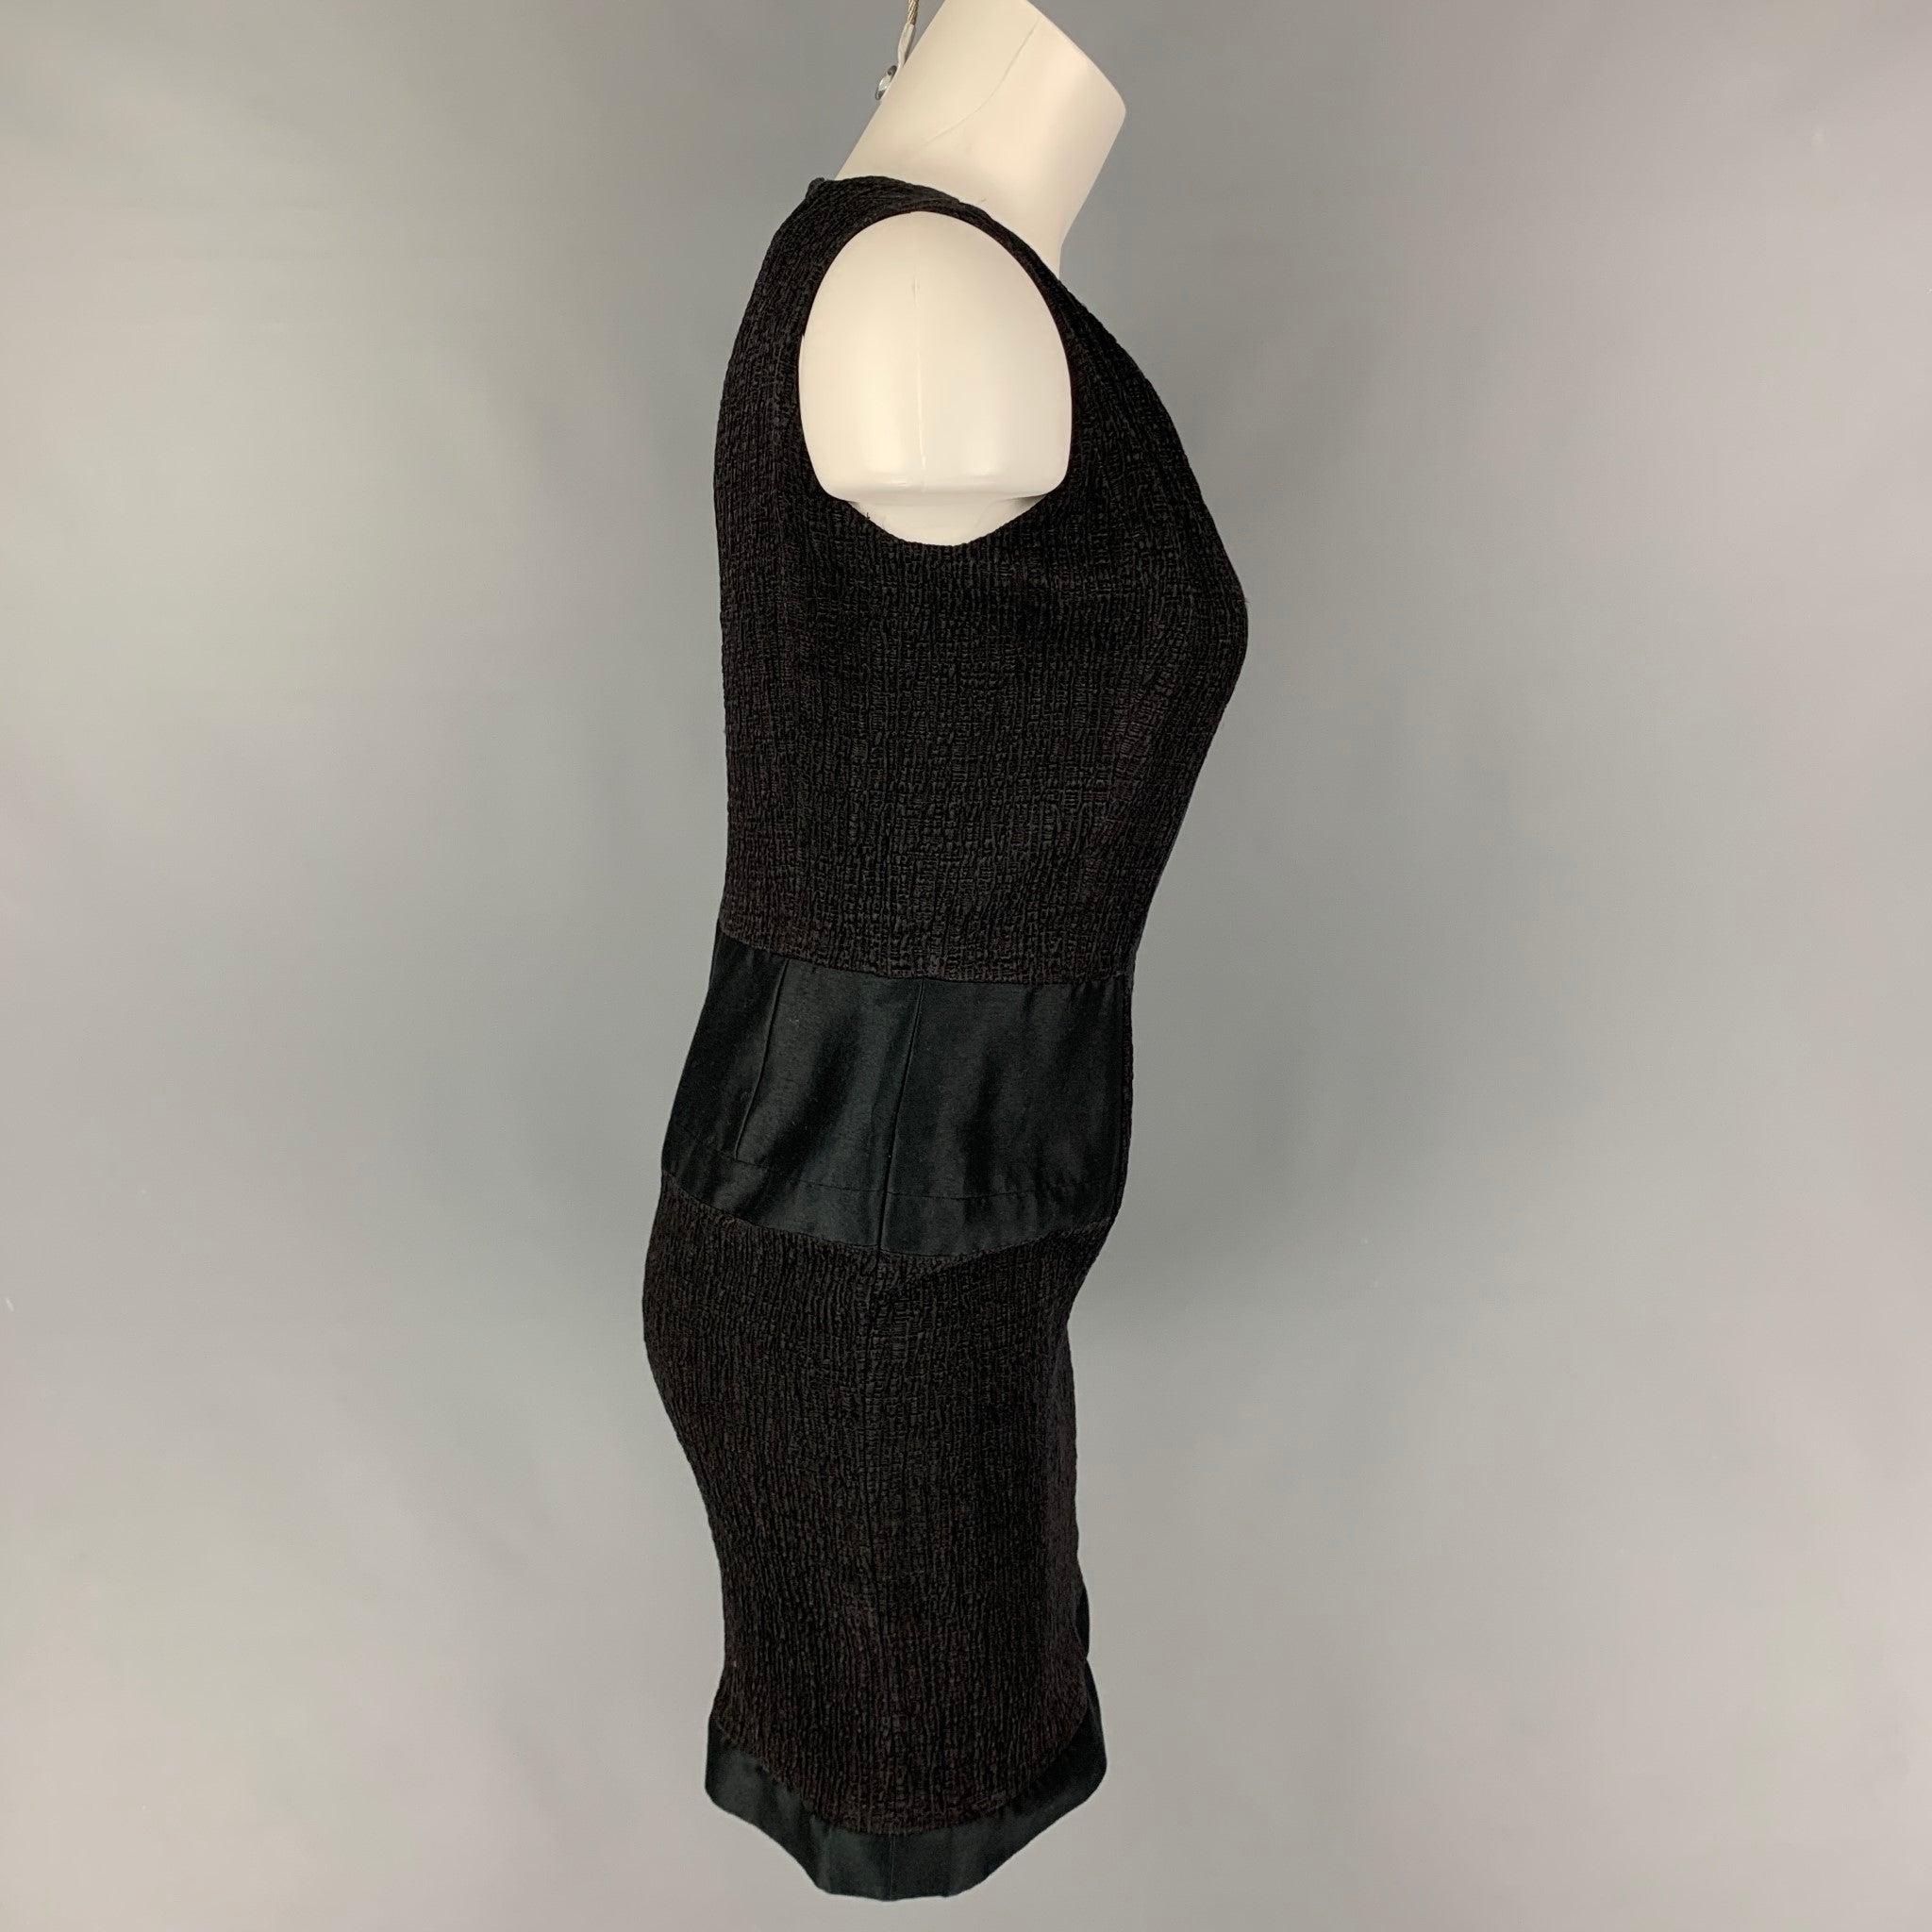 OSCAR DE LA RENTA dress comes in a black textured cotton / ilk featuring a sheath style, sleeveless, and a back zip up closure. Made in Italy.
Very Good
Pre-Owned Condition. 

Marked:   10 

Measurements: 
 
Shoulder: 12.25 inches Bust: 32 inches 